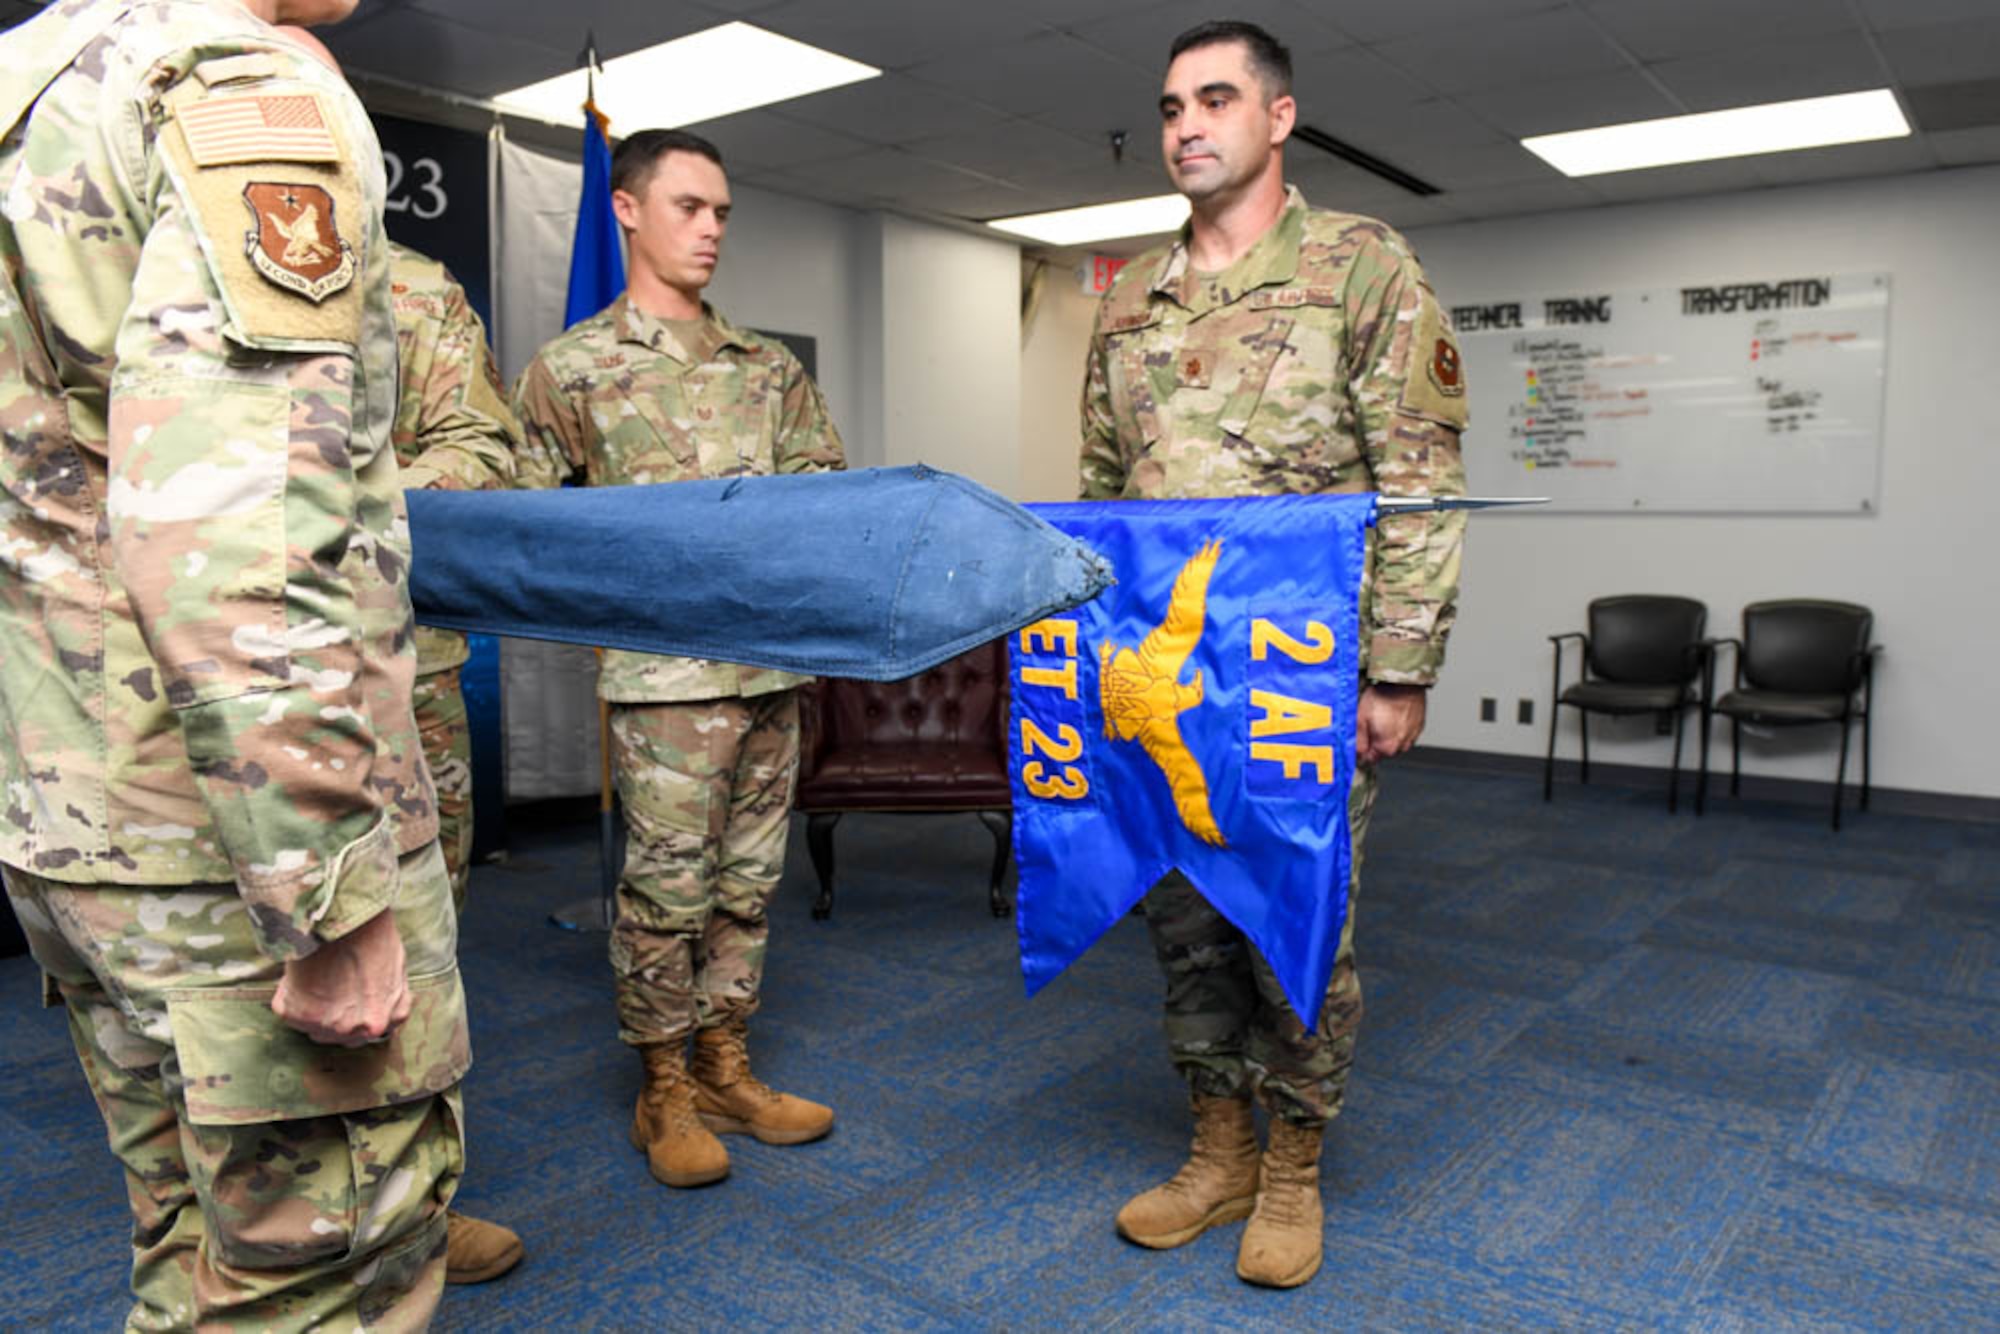 U.S. Air Force Maj. Gen. Michele Edmondson, left, Second Air Force commander, and USAF Maj. Jesse Johnson, right, Detachment 23 commander, stand in formation as orders to reveal the new guidon are read during the Det. 23. Re-alignment ceremony.